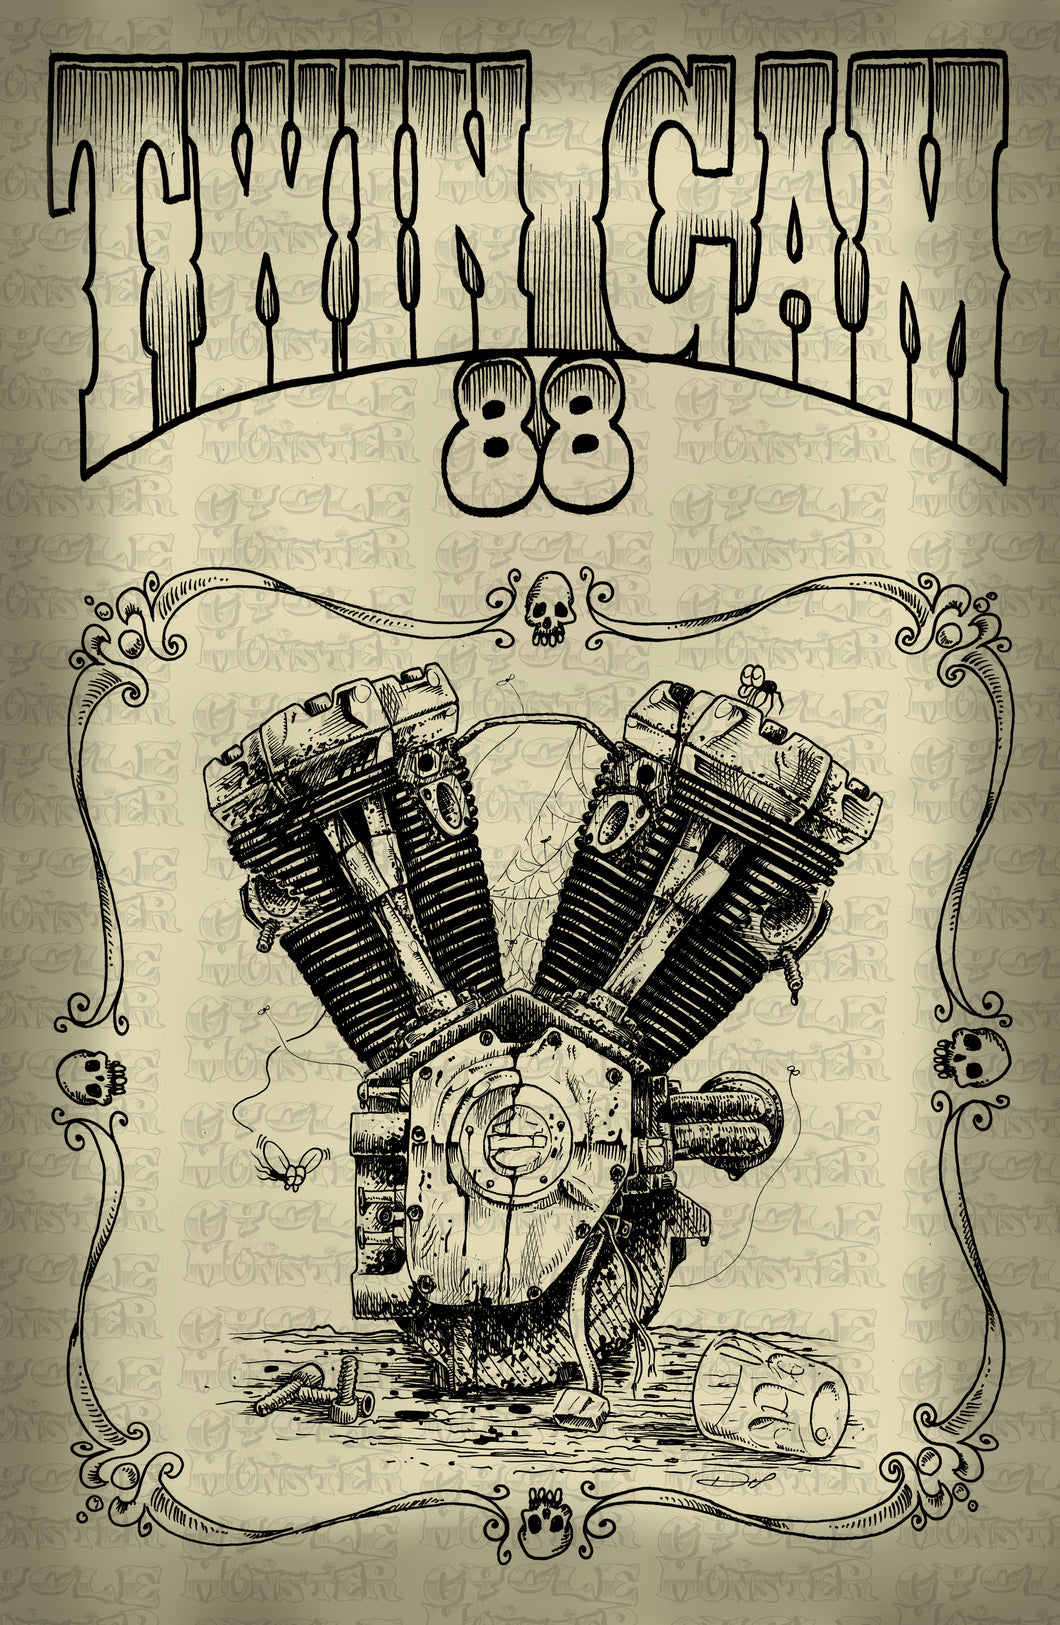 (24 poster) TWIN CAM 88